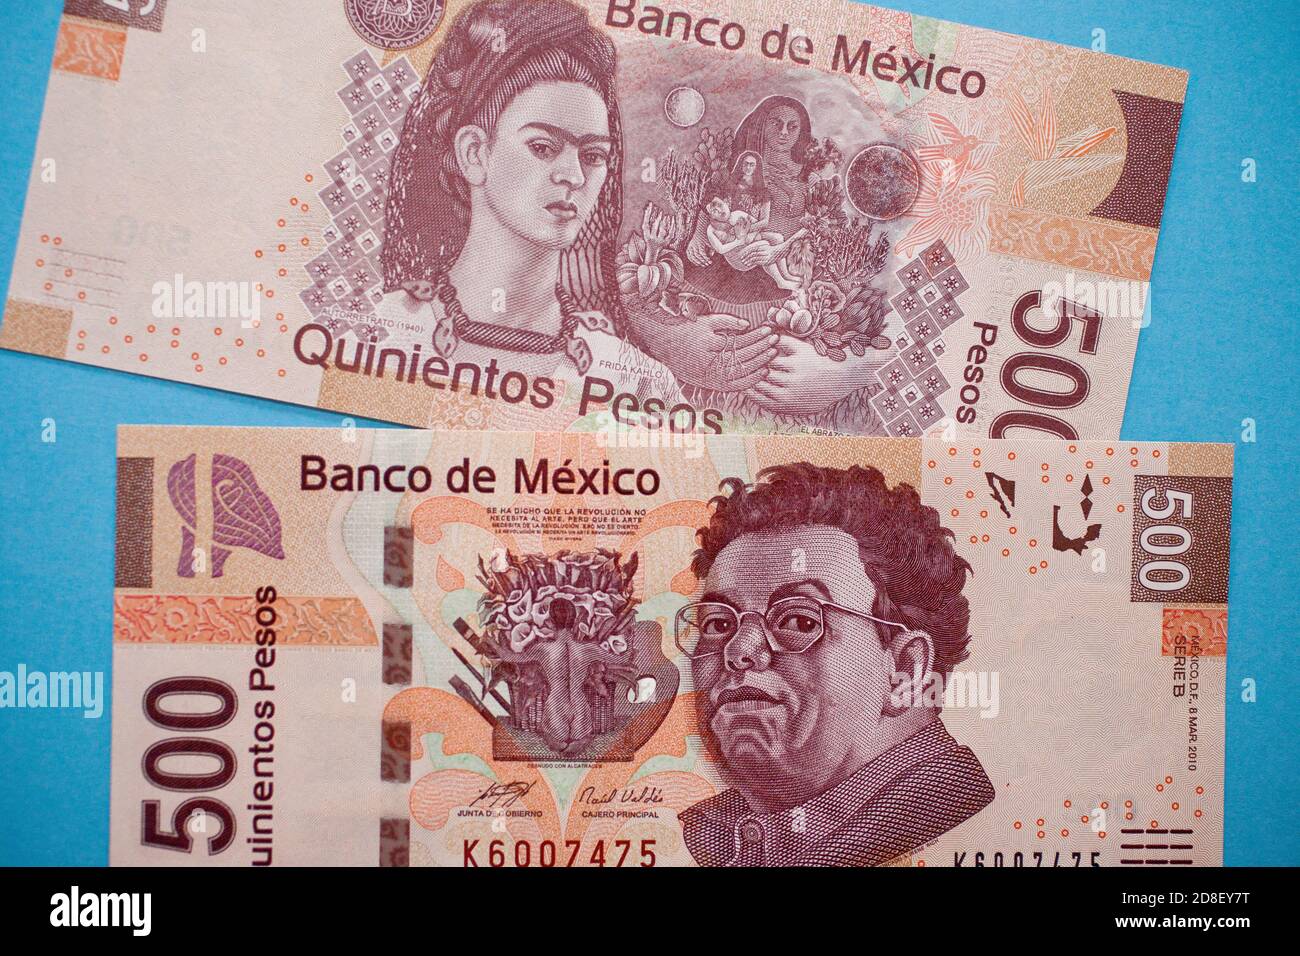 Mexican 500 peso bank notes featuring artists Frida Kahlo and Diego Rivera  Stock Photo - Alamy